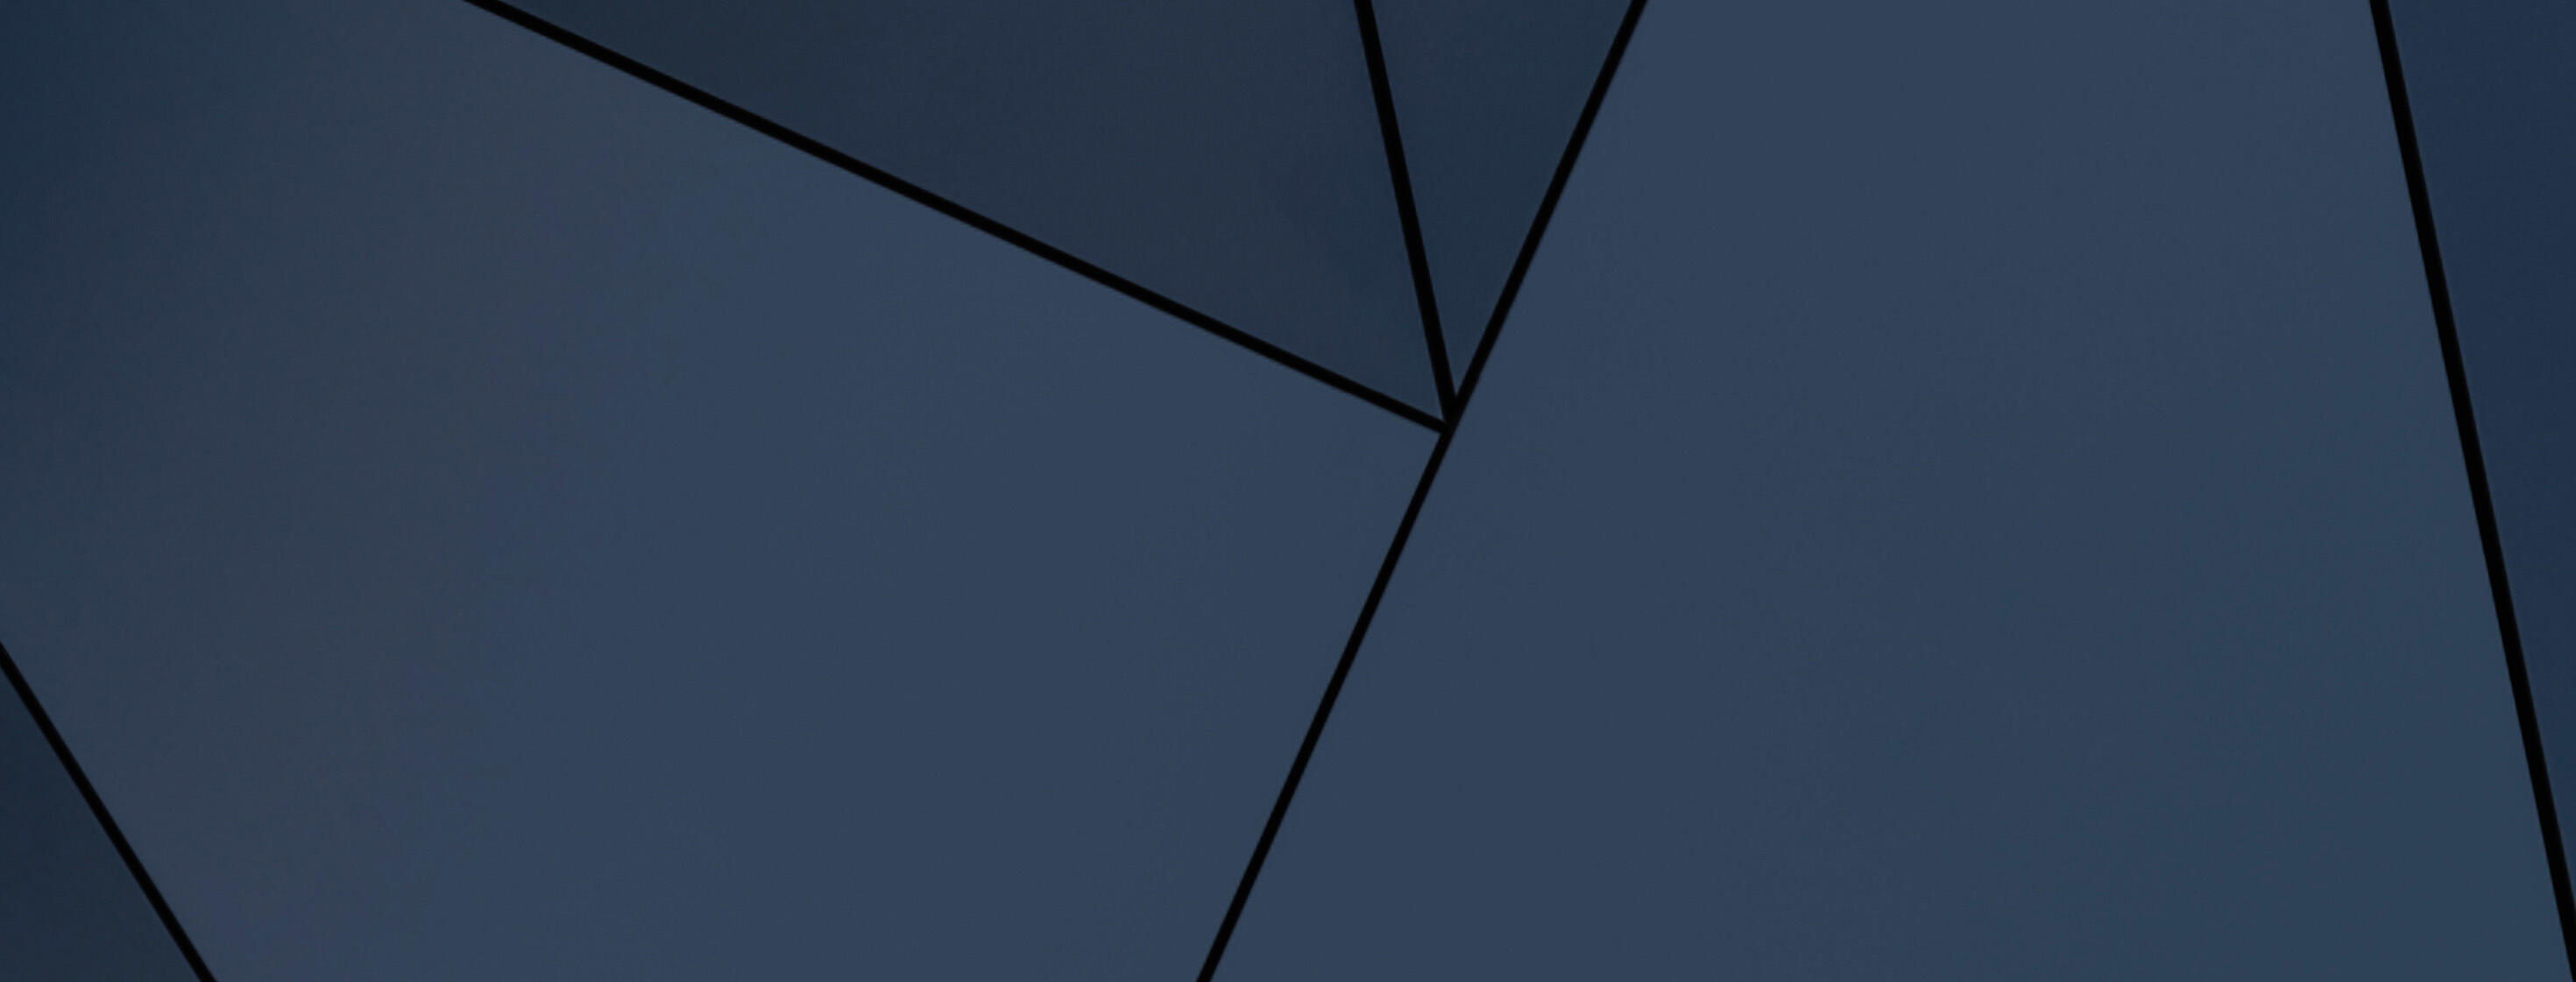 Perspectives #11 banner